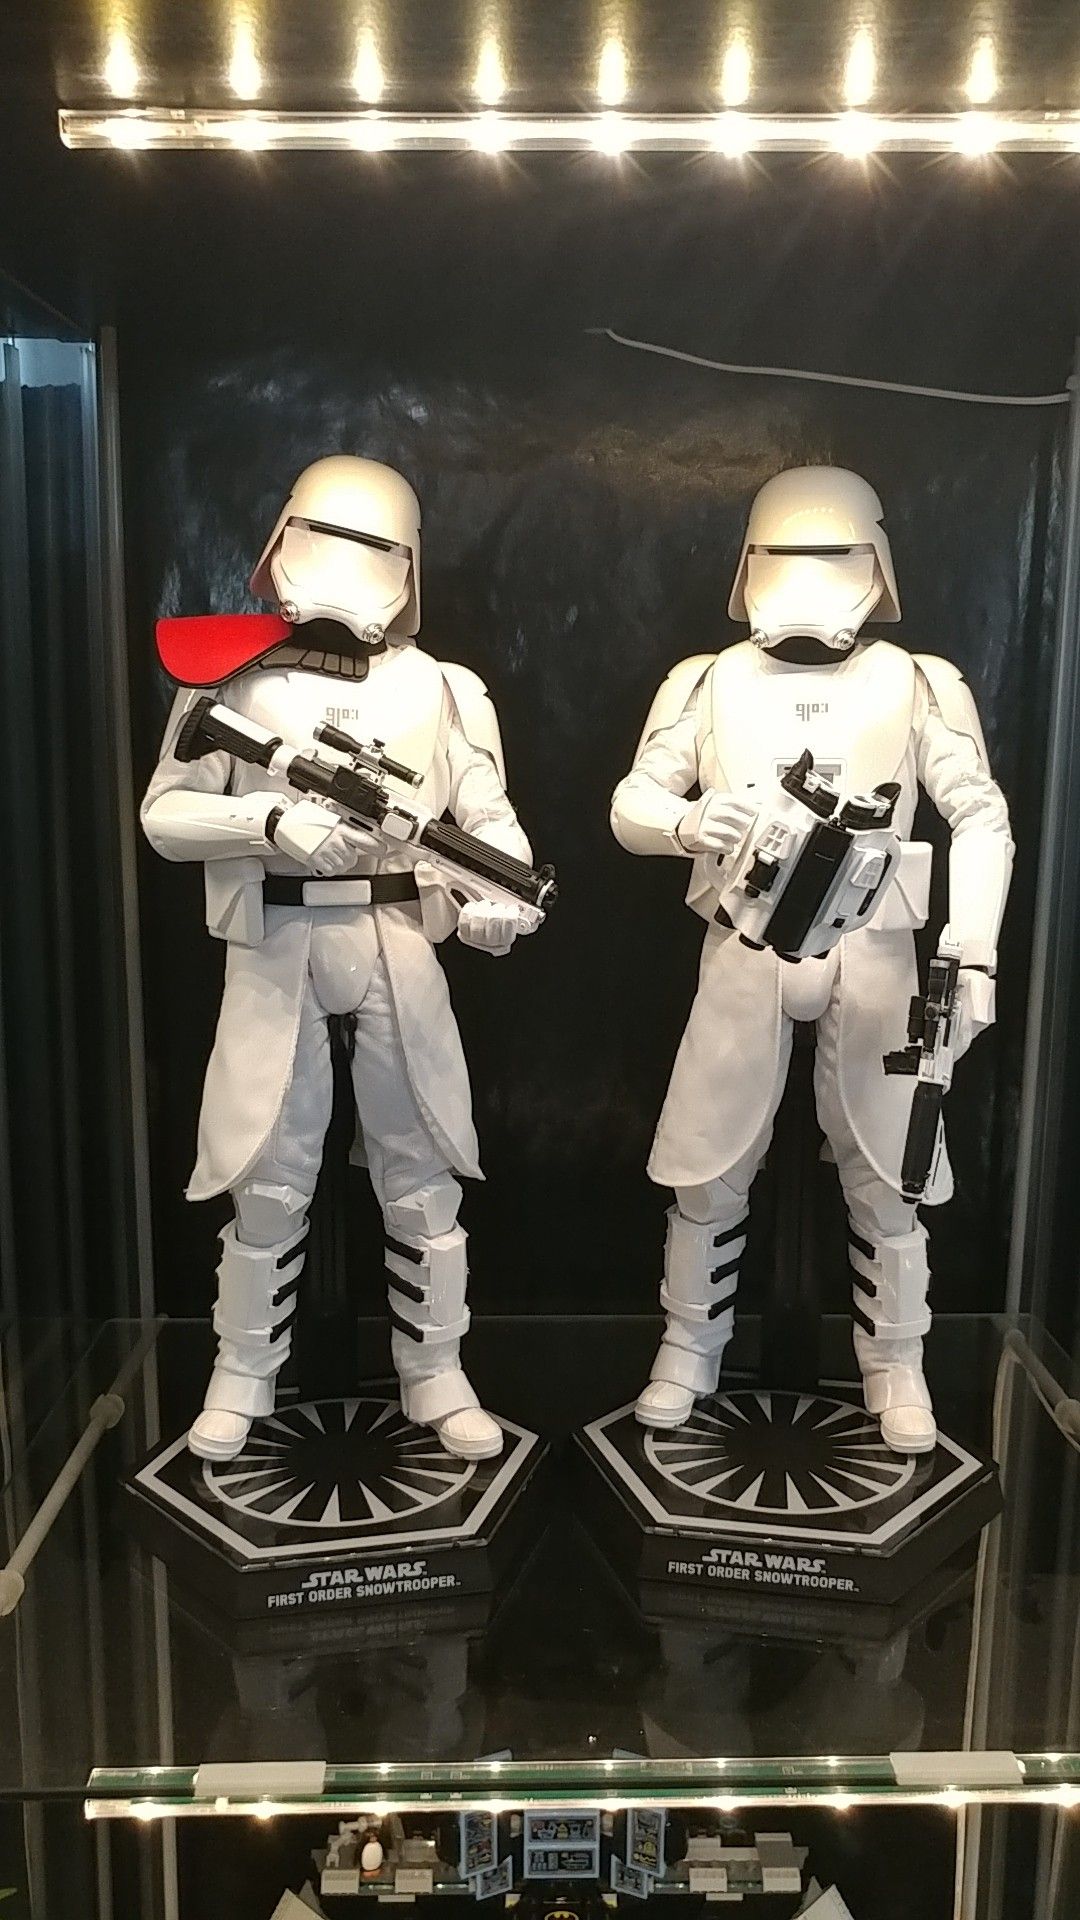 Hot Toys 1:6 scale First Order Snowtroopers